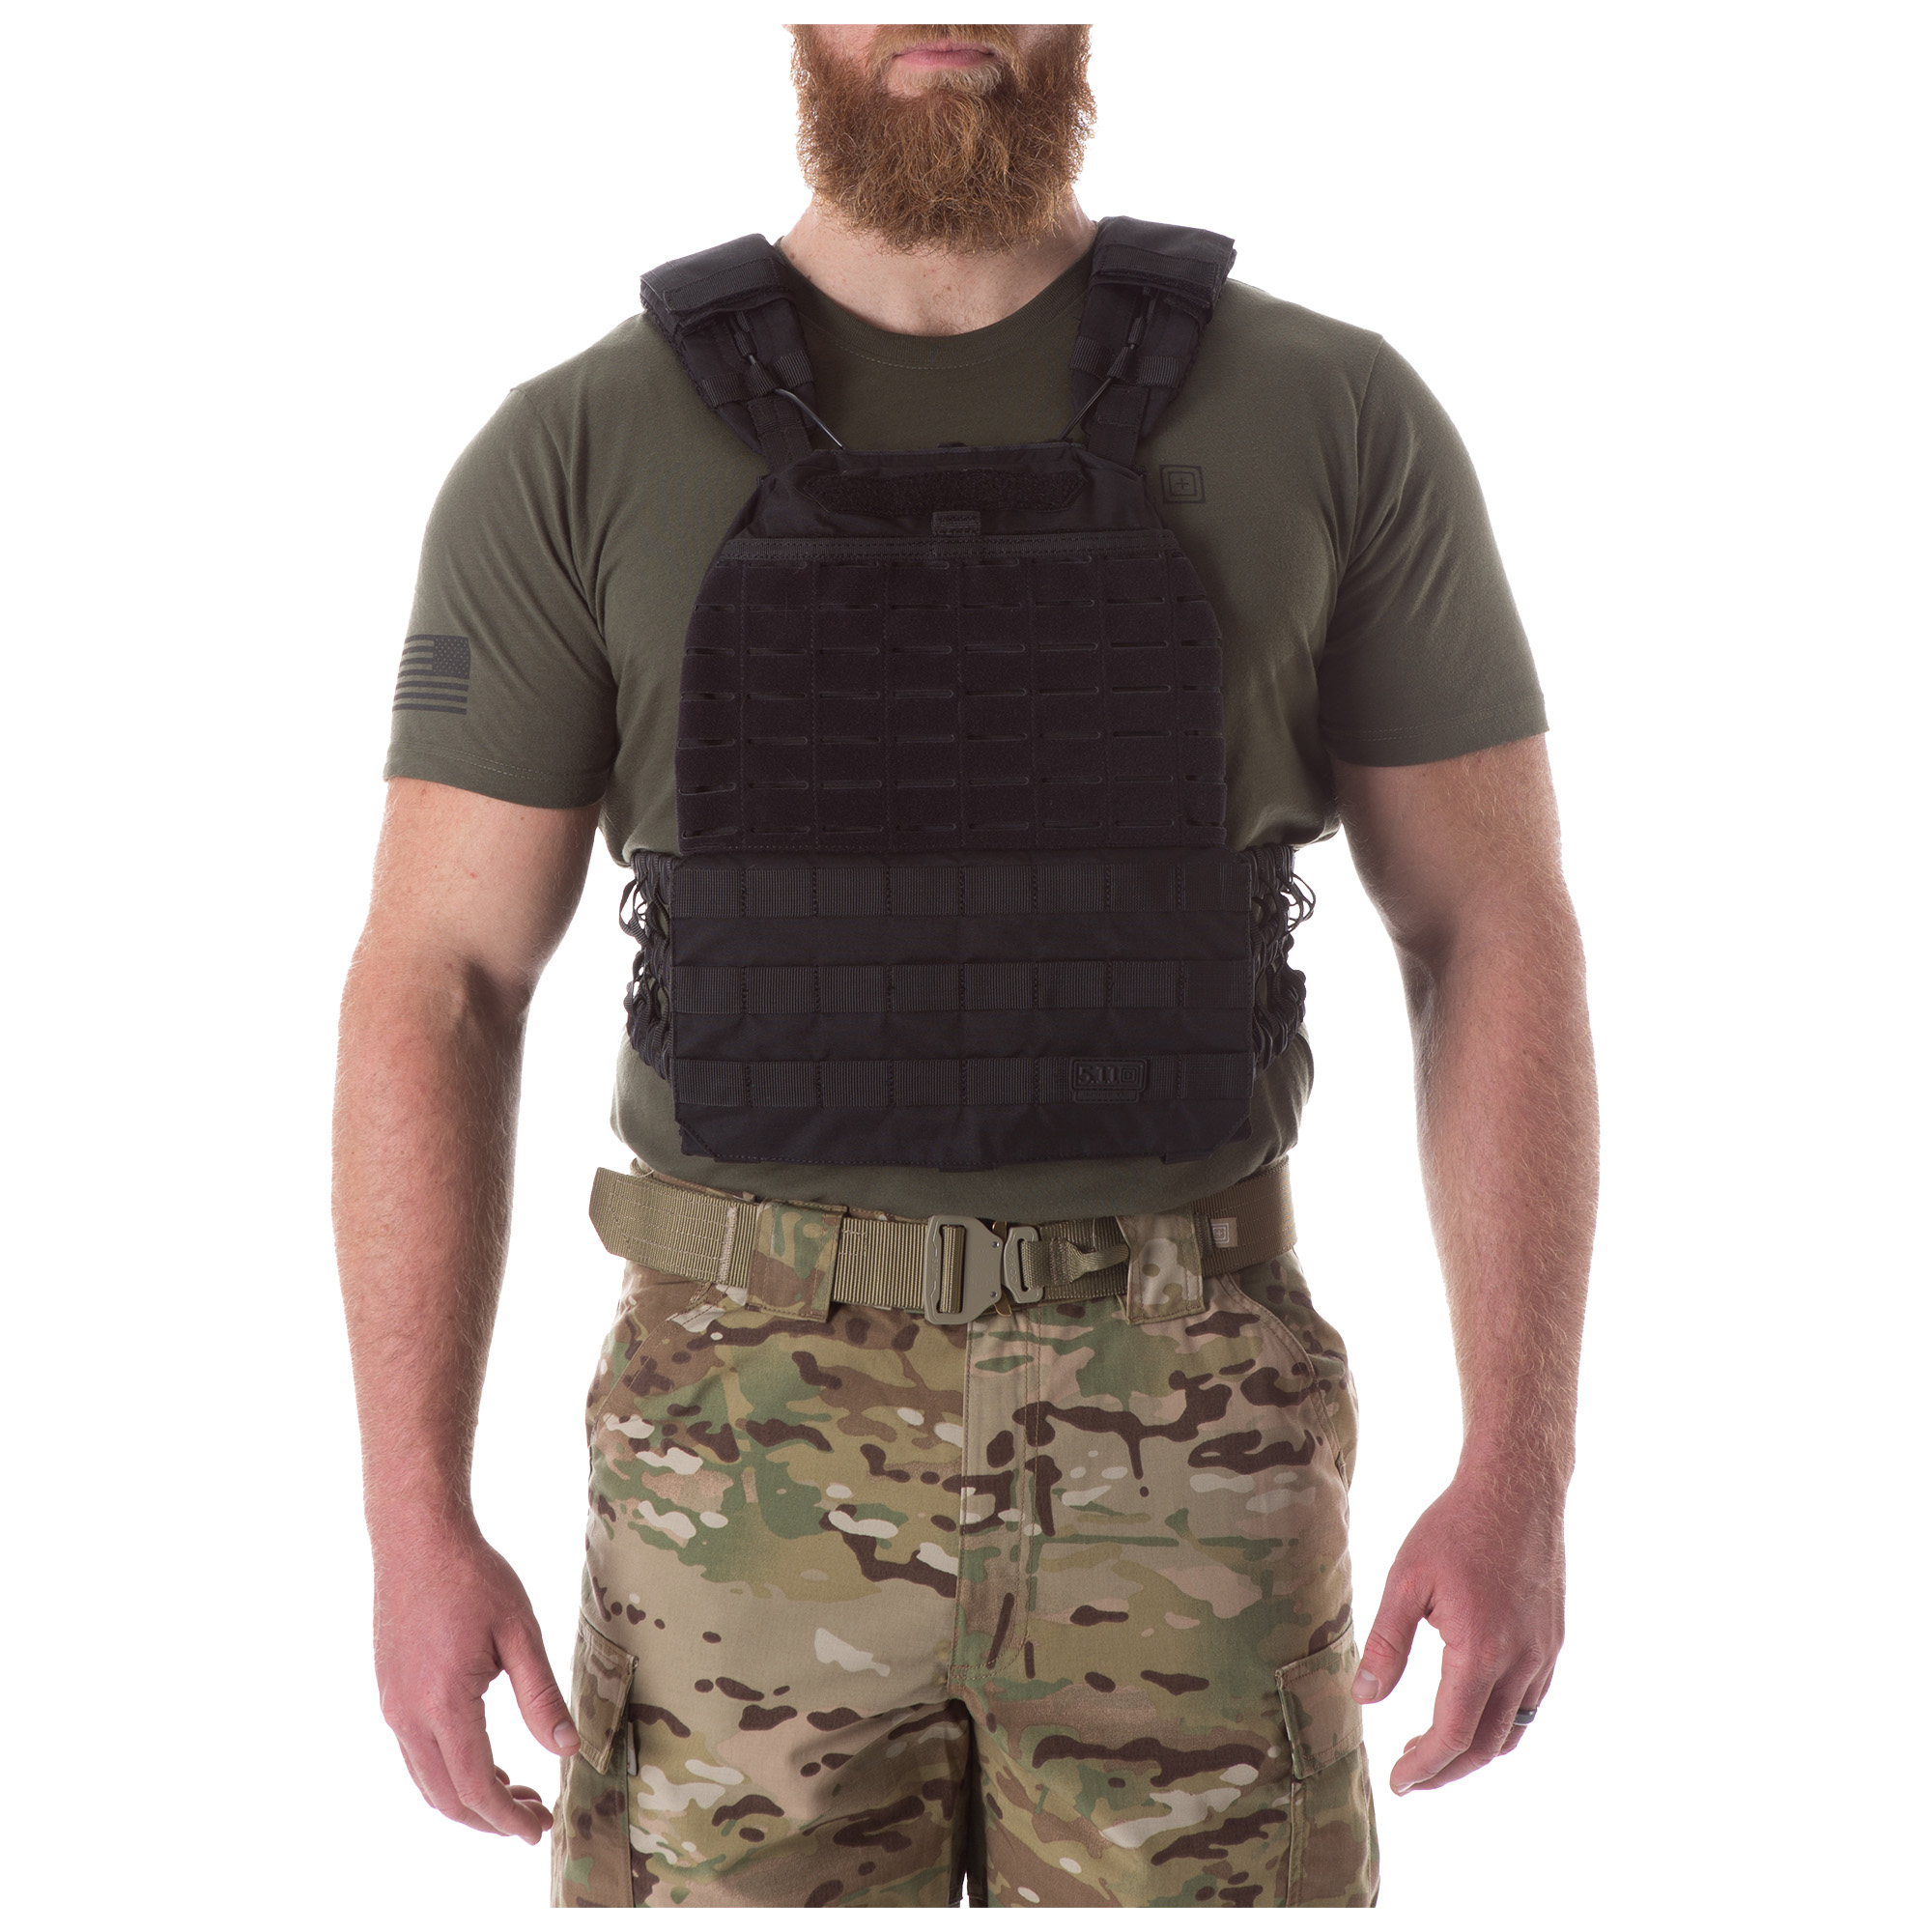 Buy 56100 5.11 Tactical Tactec Plate Carrier - 5.11 Tactical Online at ...